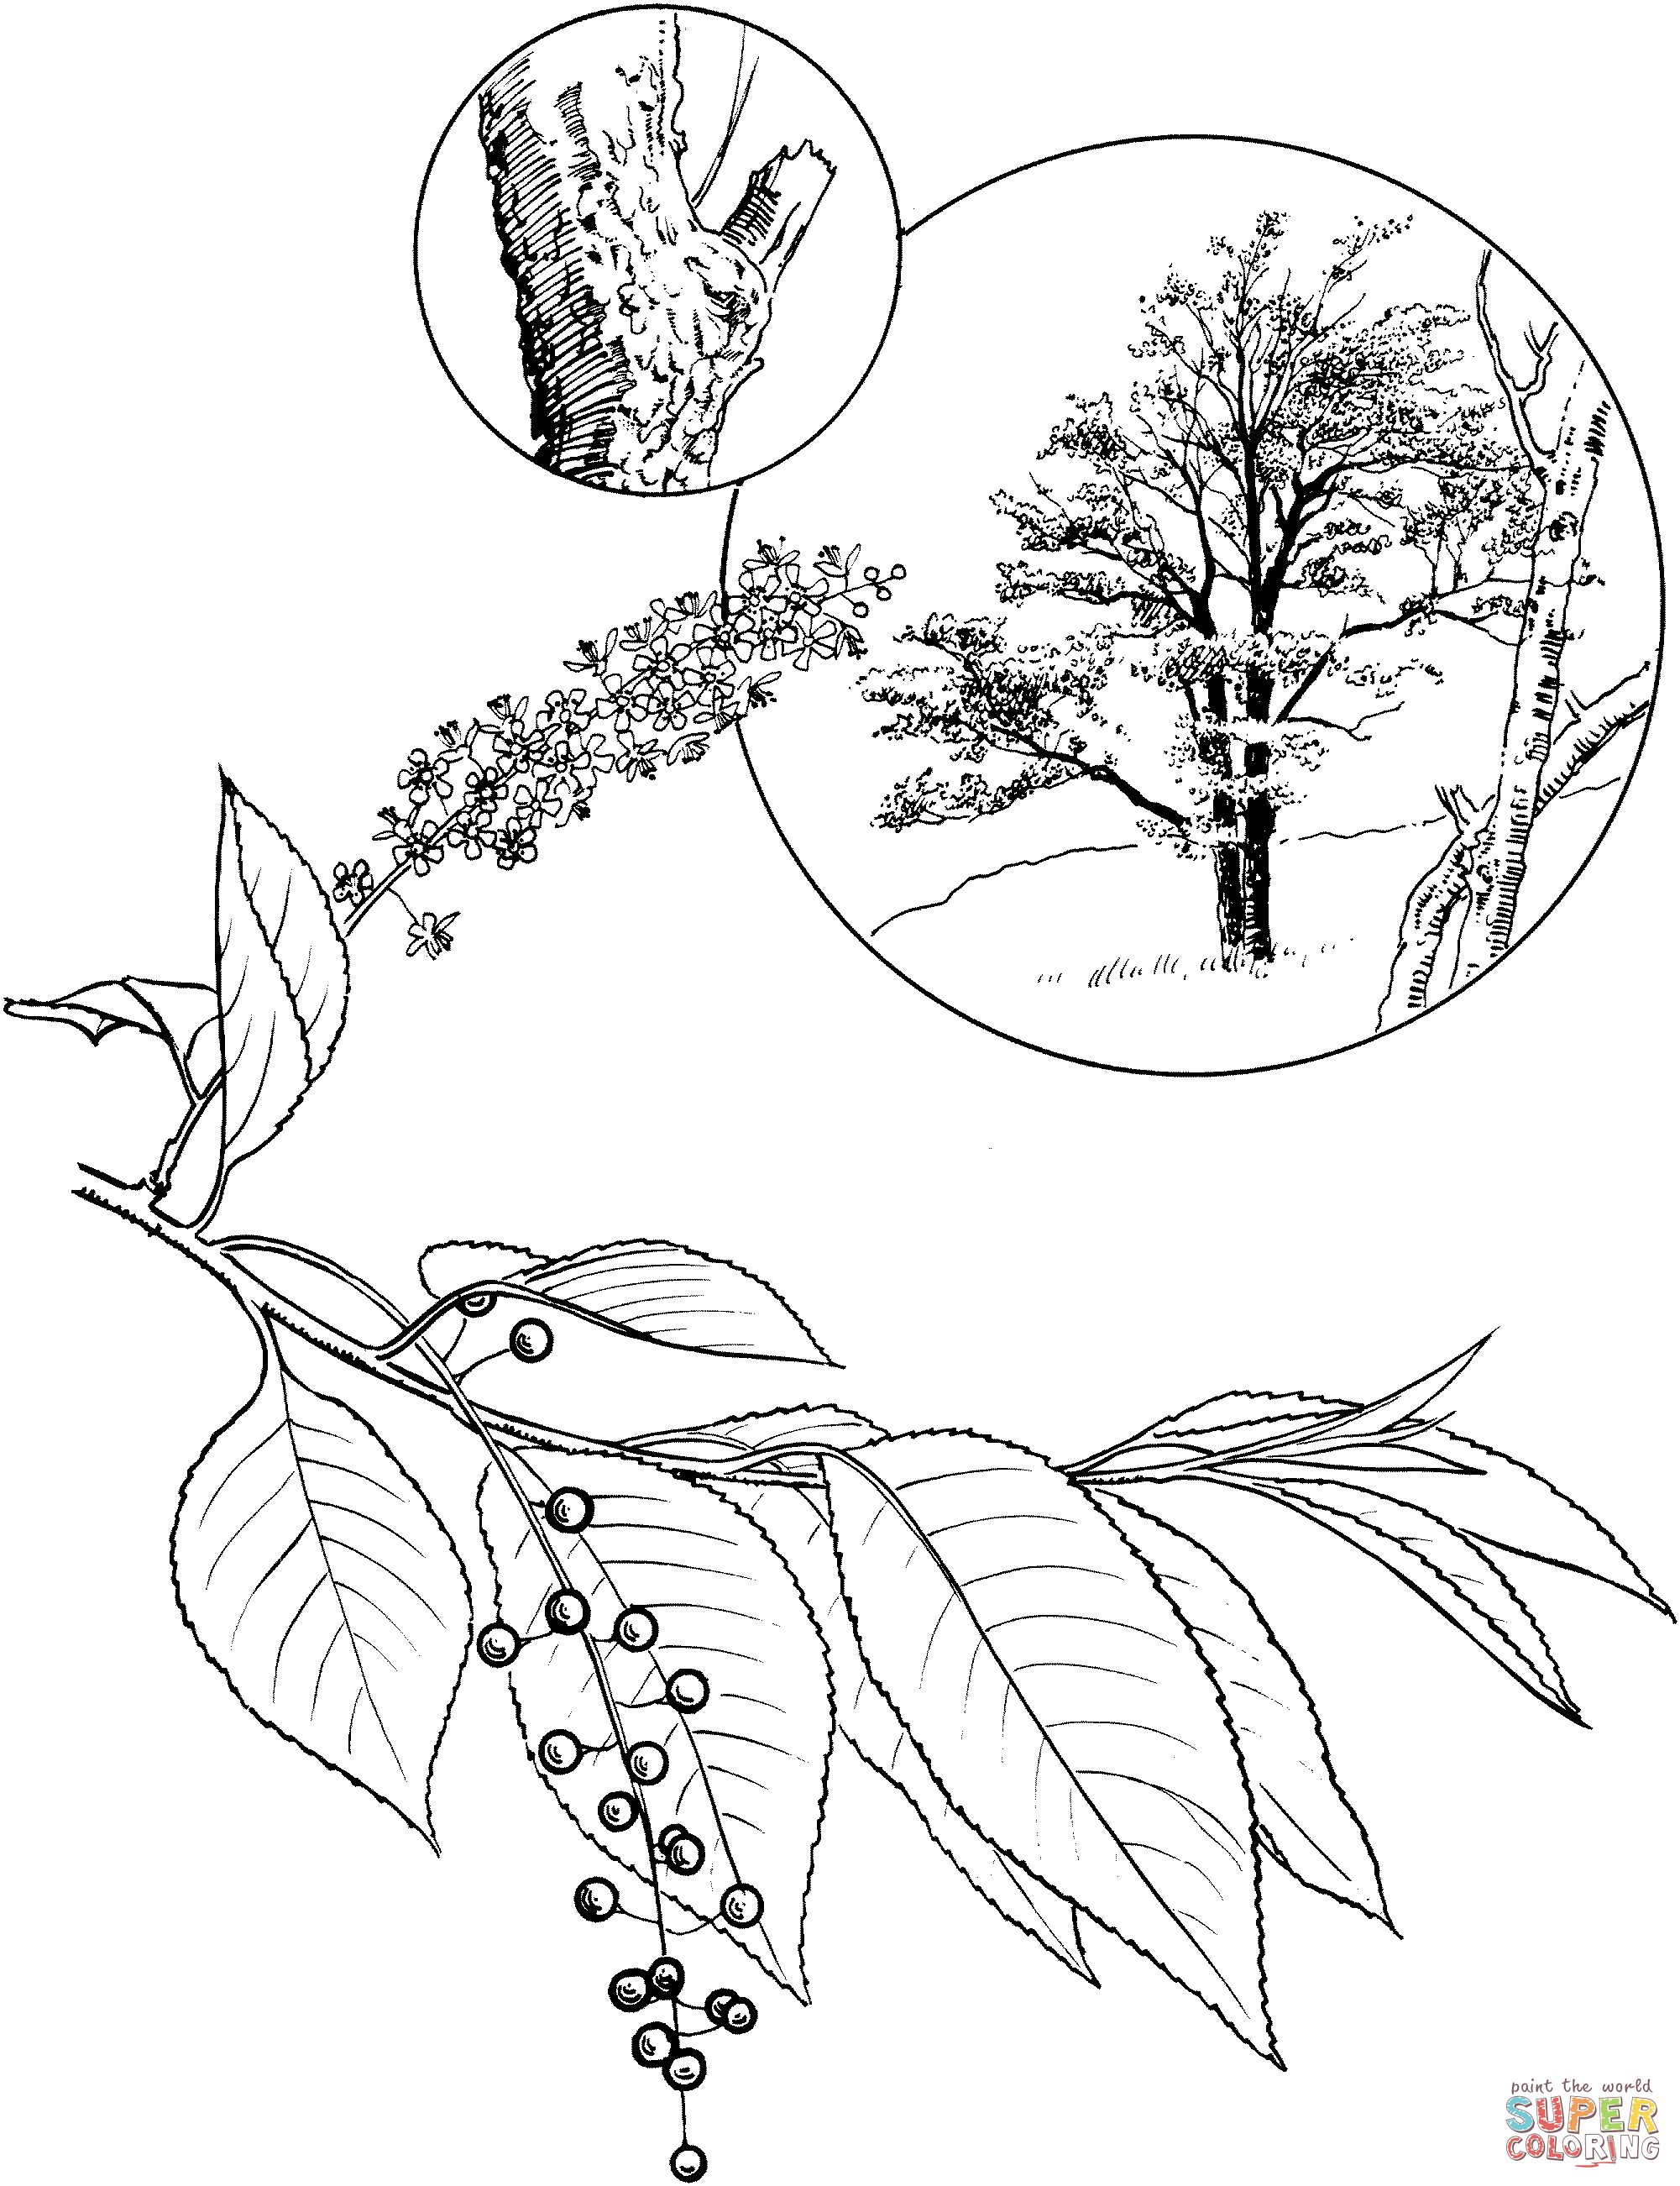 Cherry Blossoms coloring page | Free Printable Coloring Pages